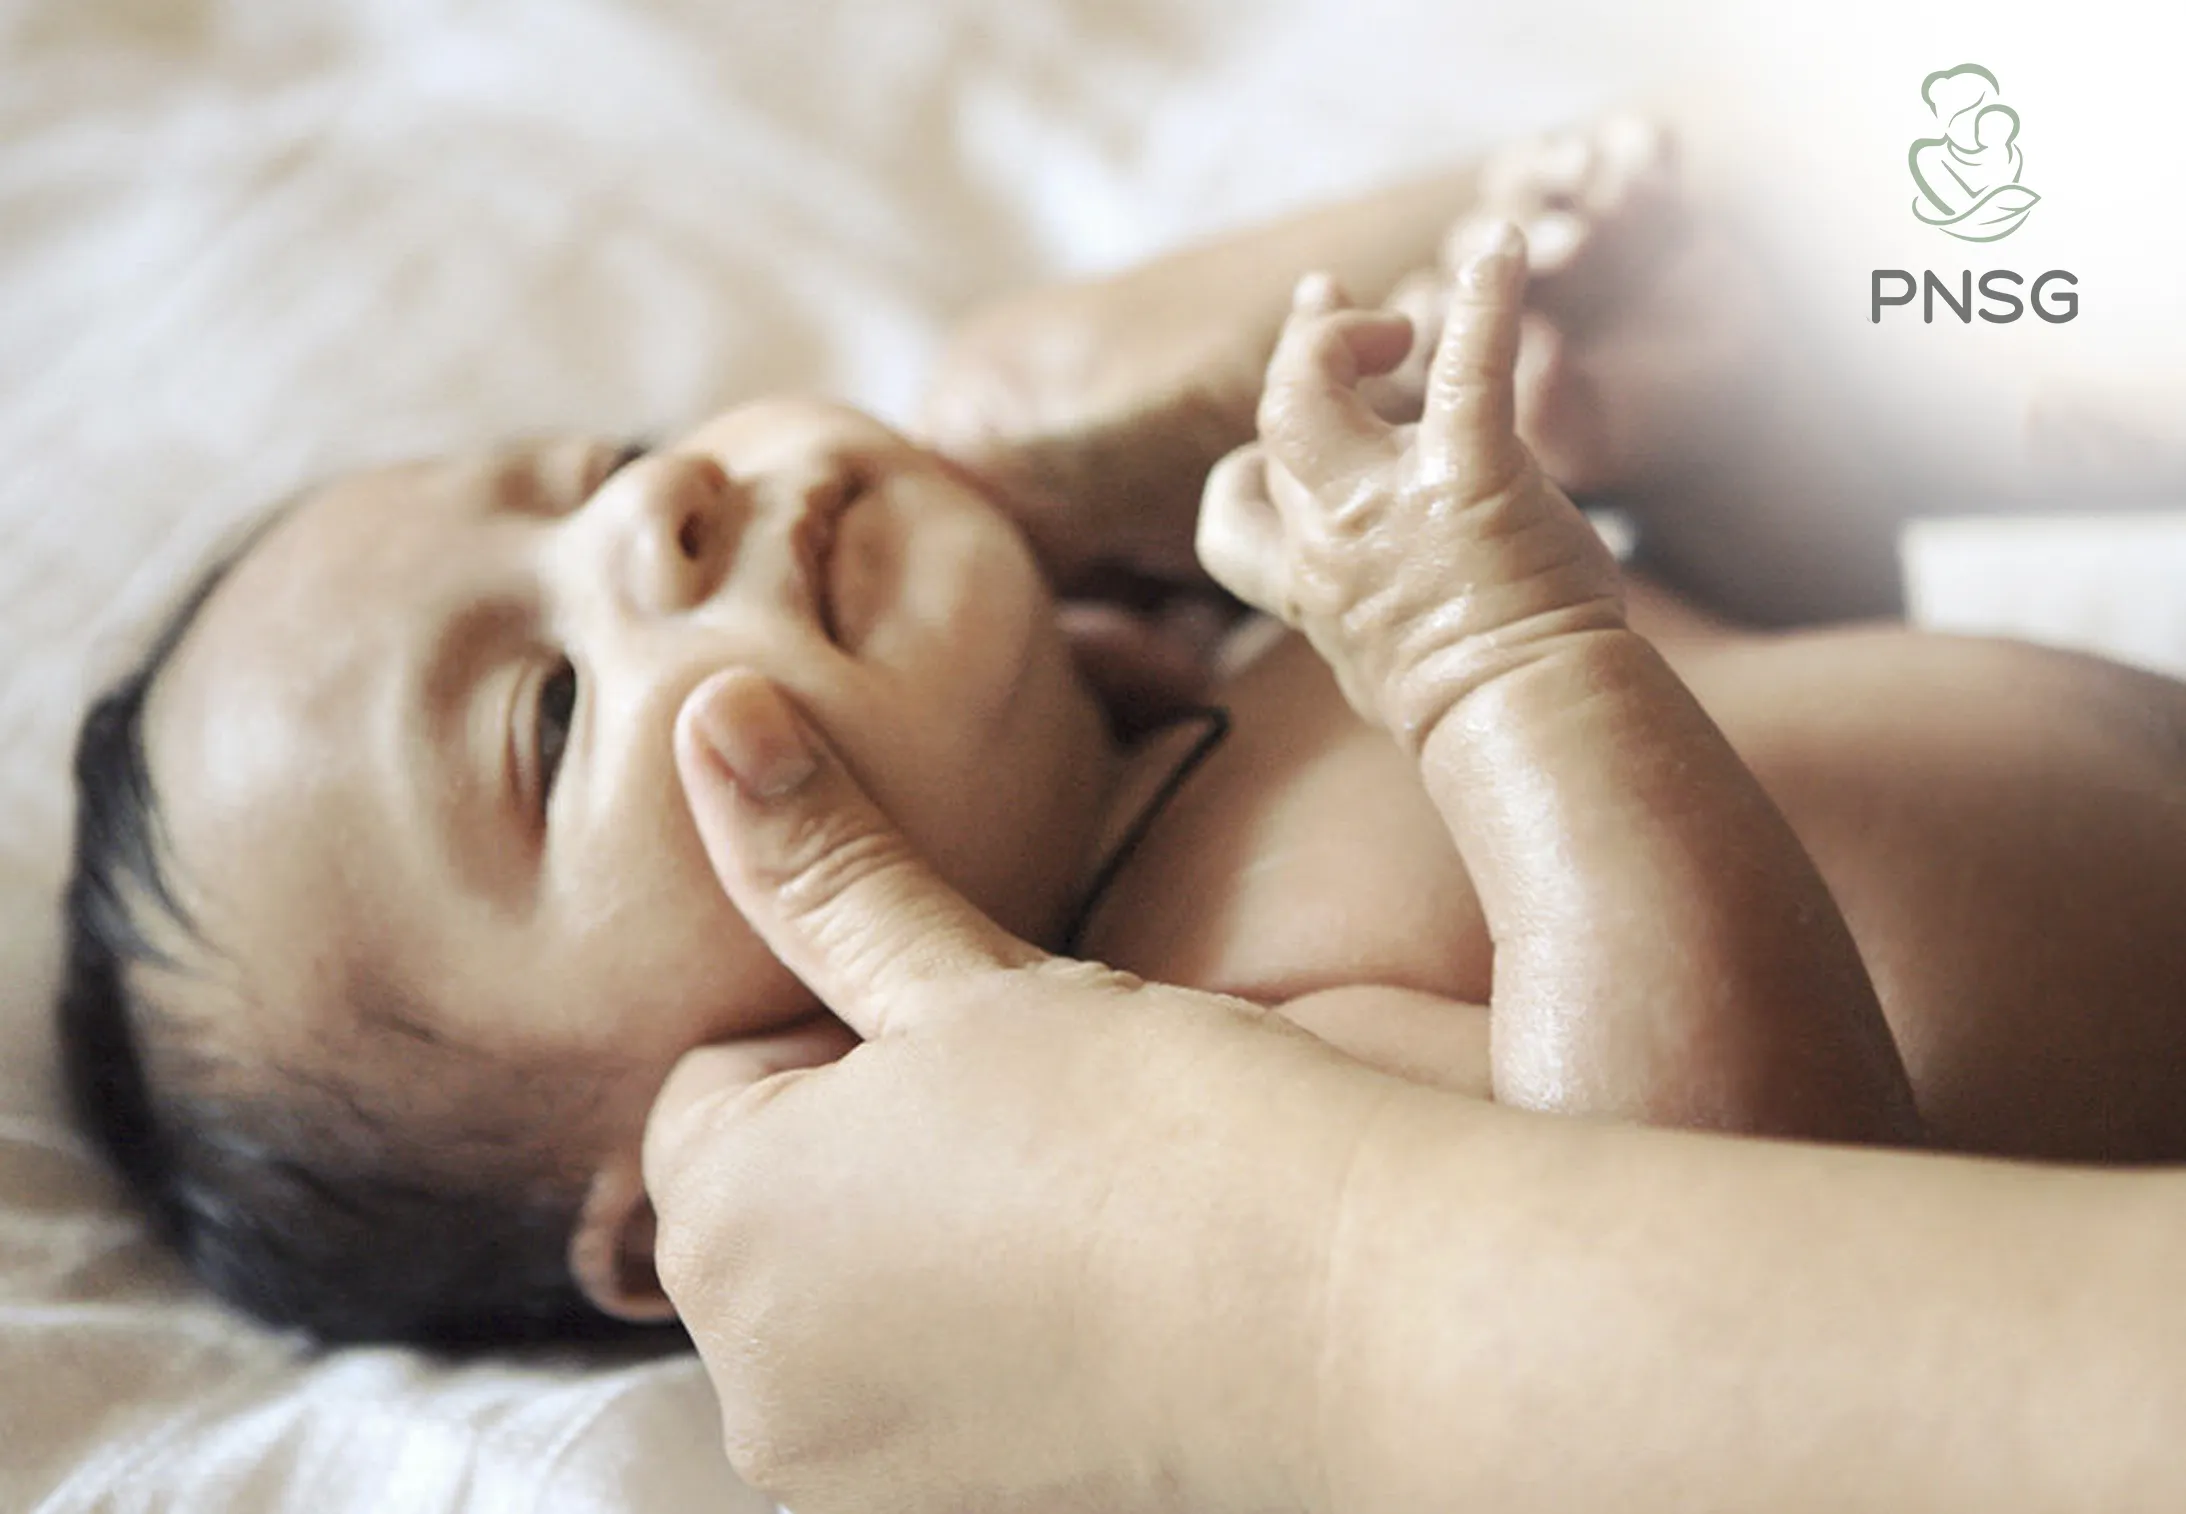 Is Newborn Massage Safe? 7 Things to Take Note of! - PNSG